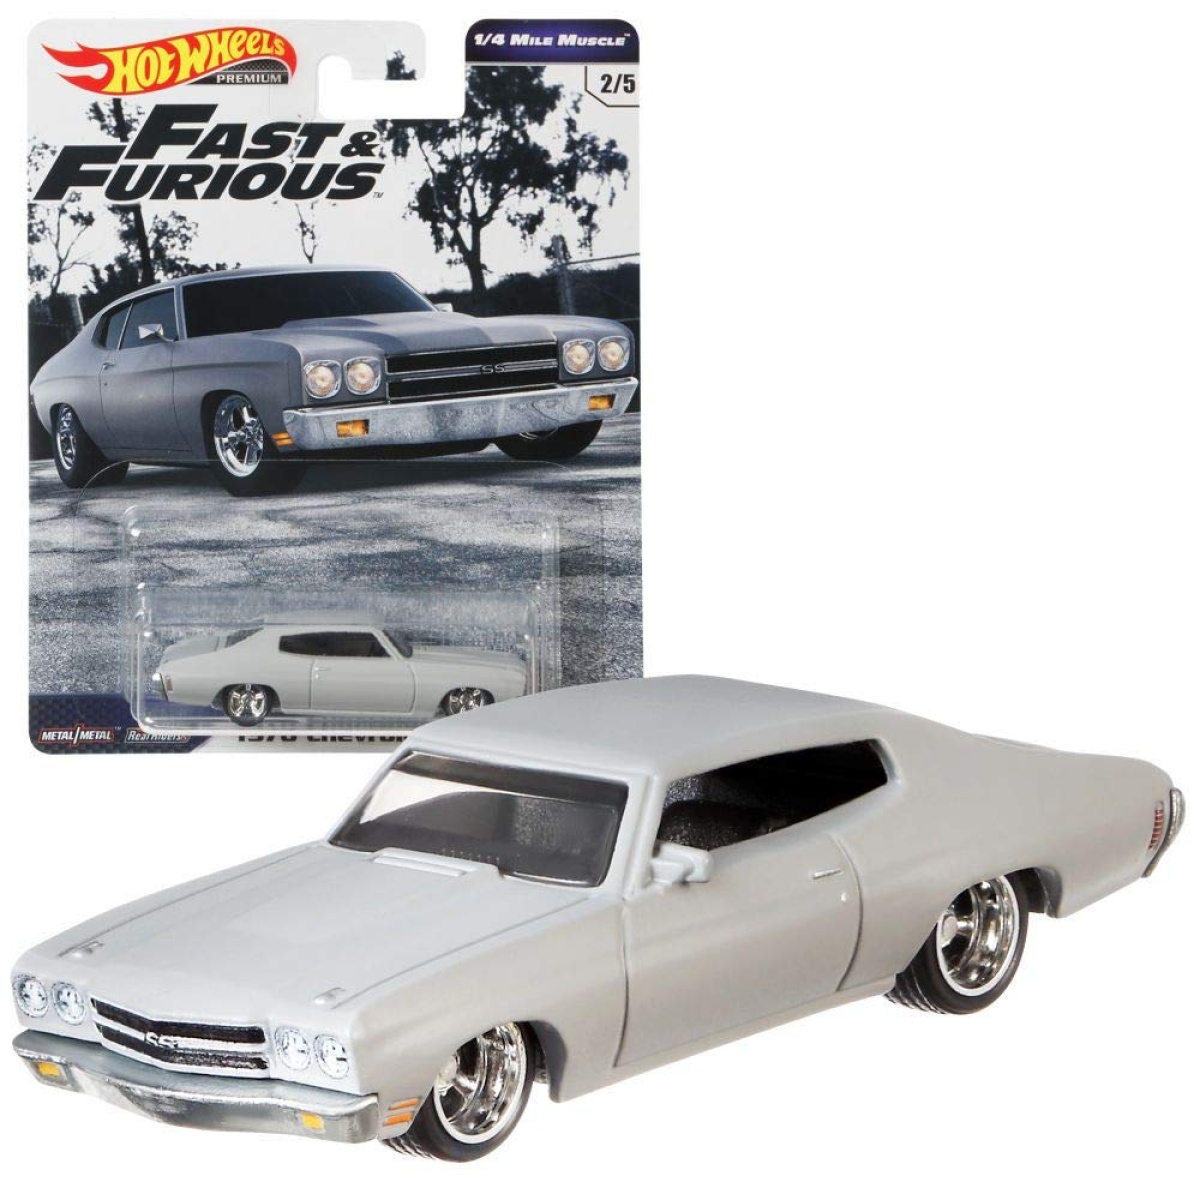 Hot wheels fast and furious - Cdiscount